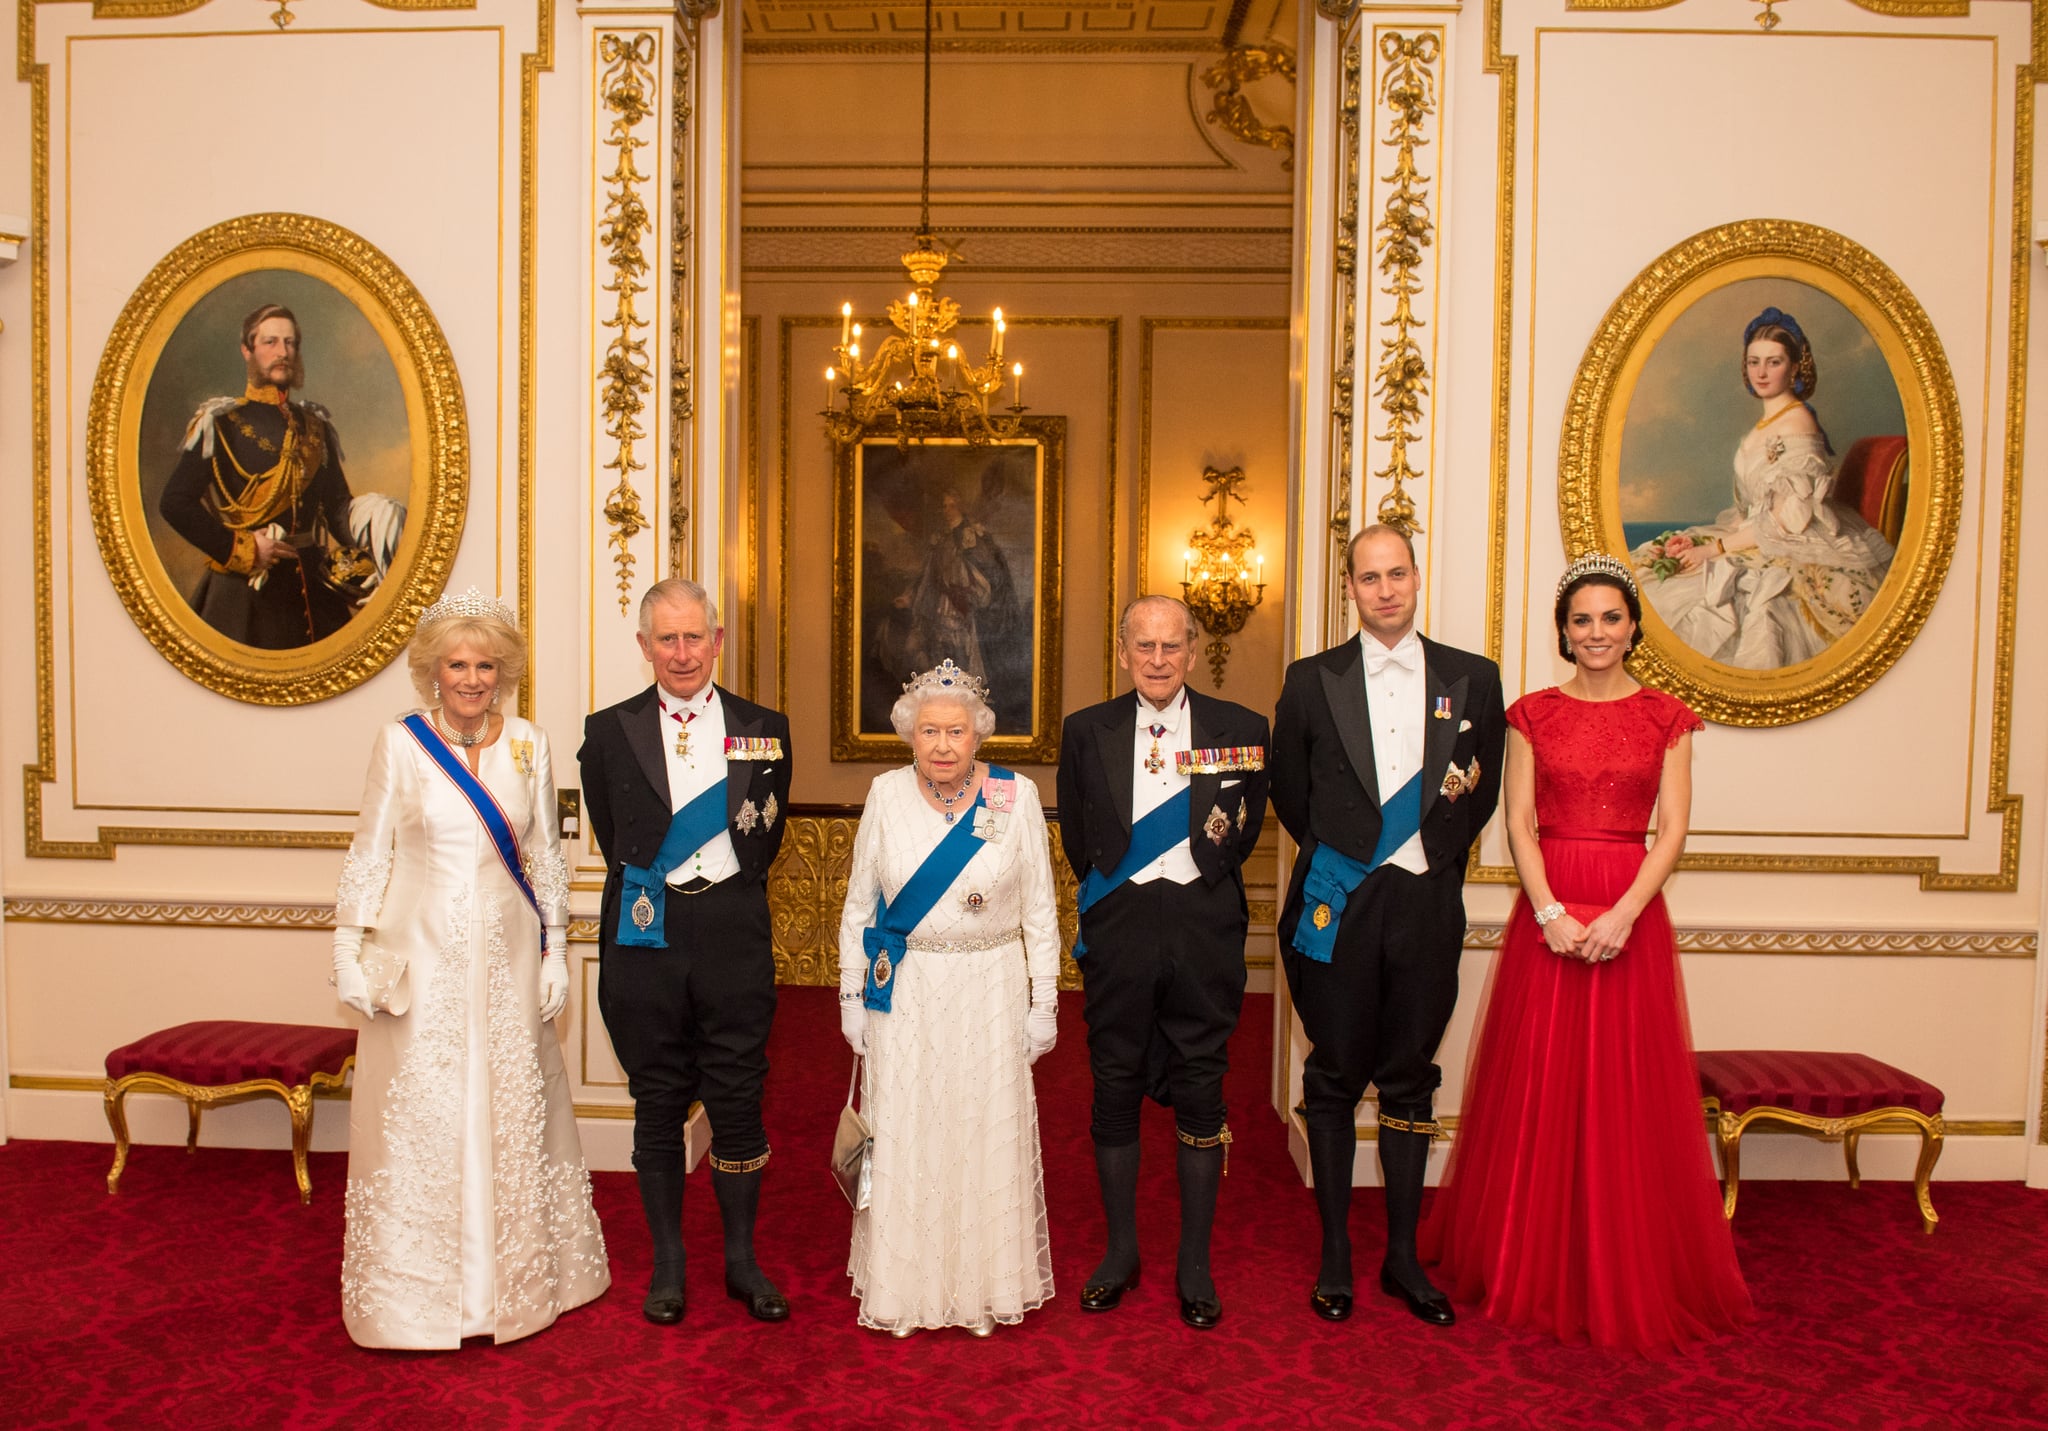 Queen Elizabeth II with her family and heirs in 2016